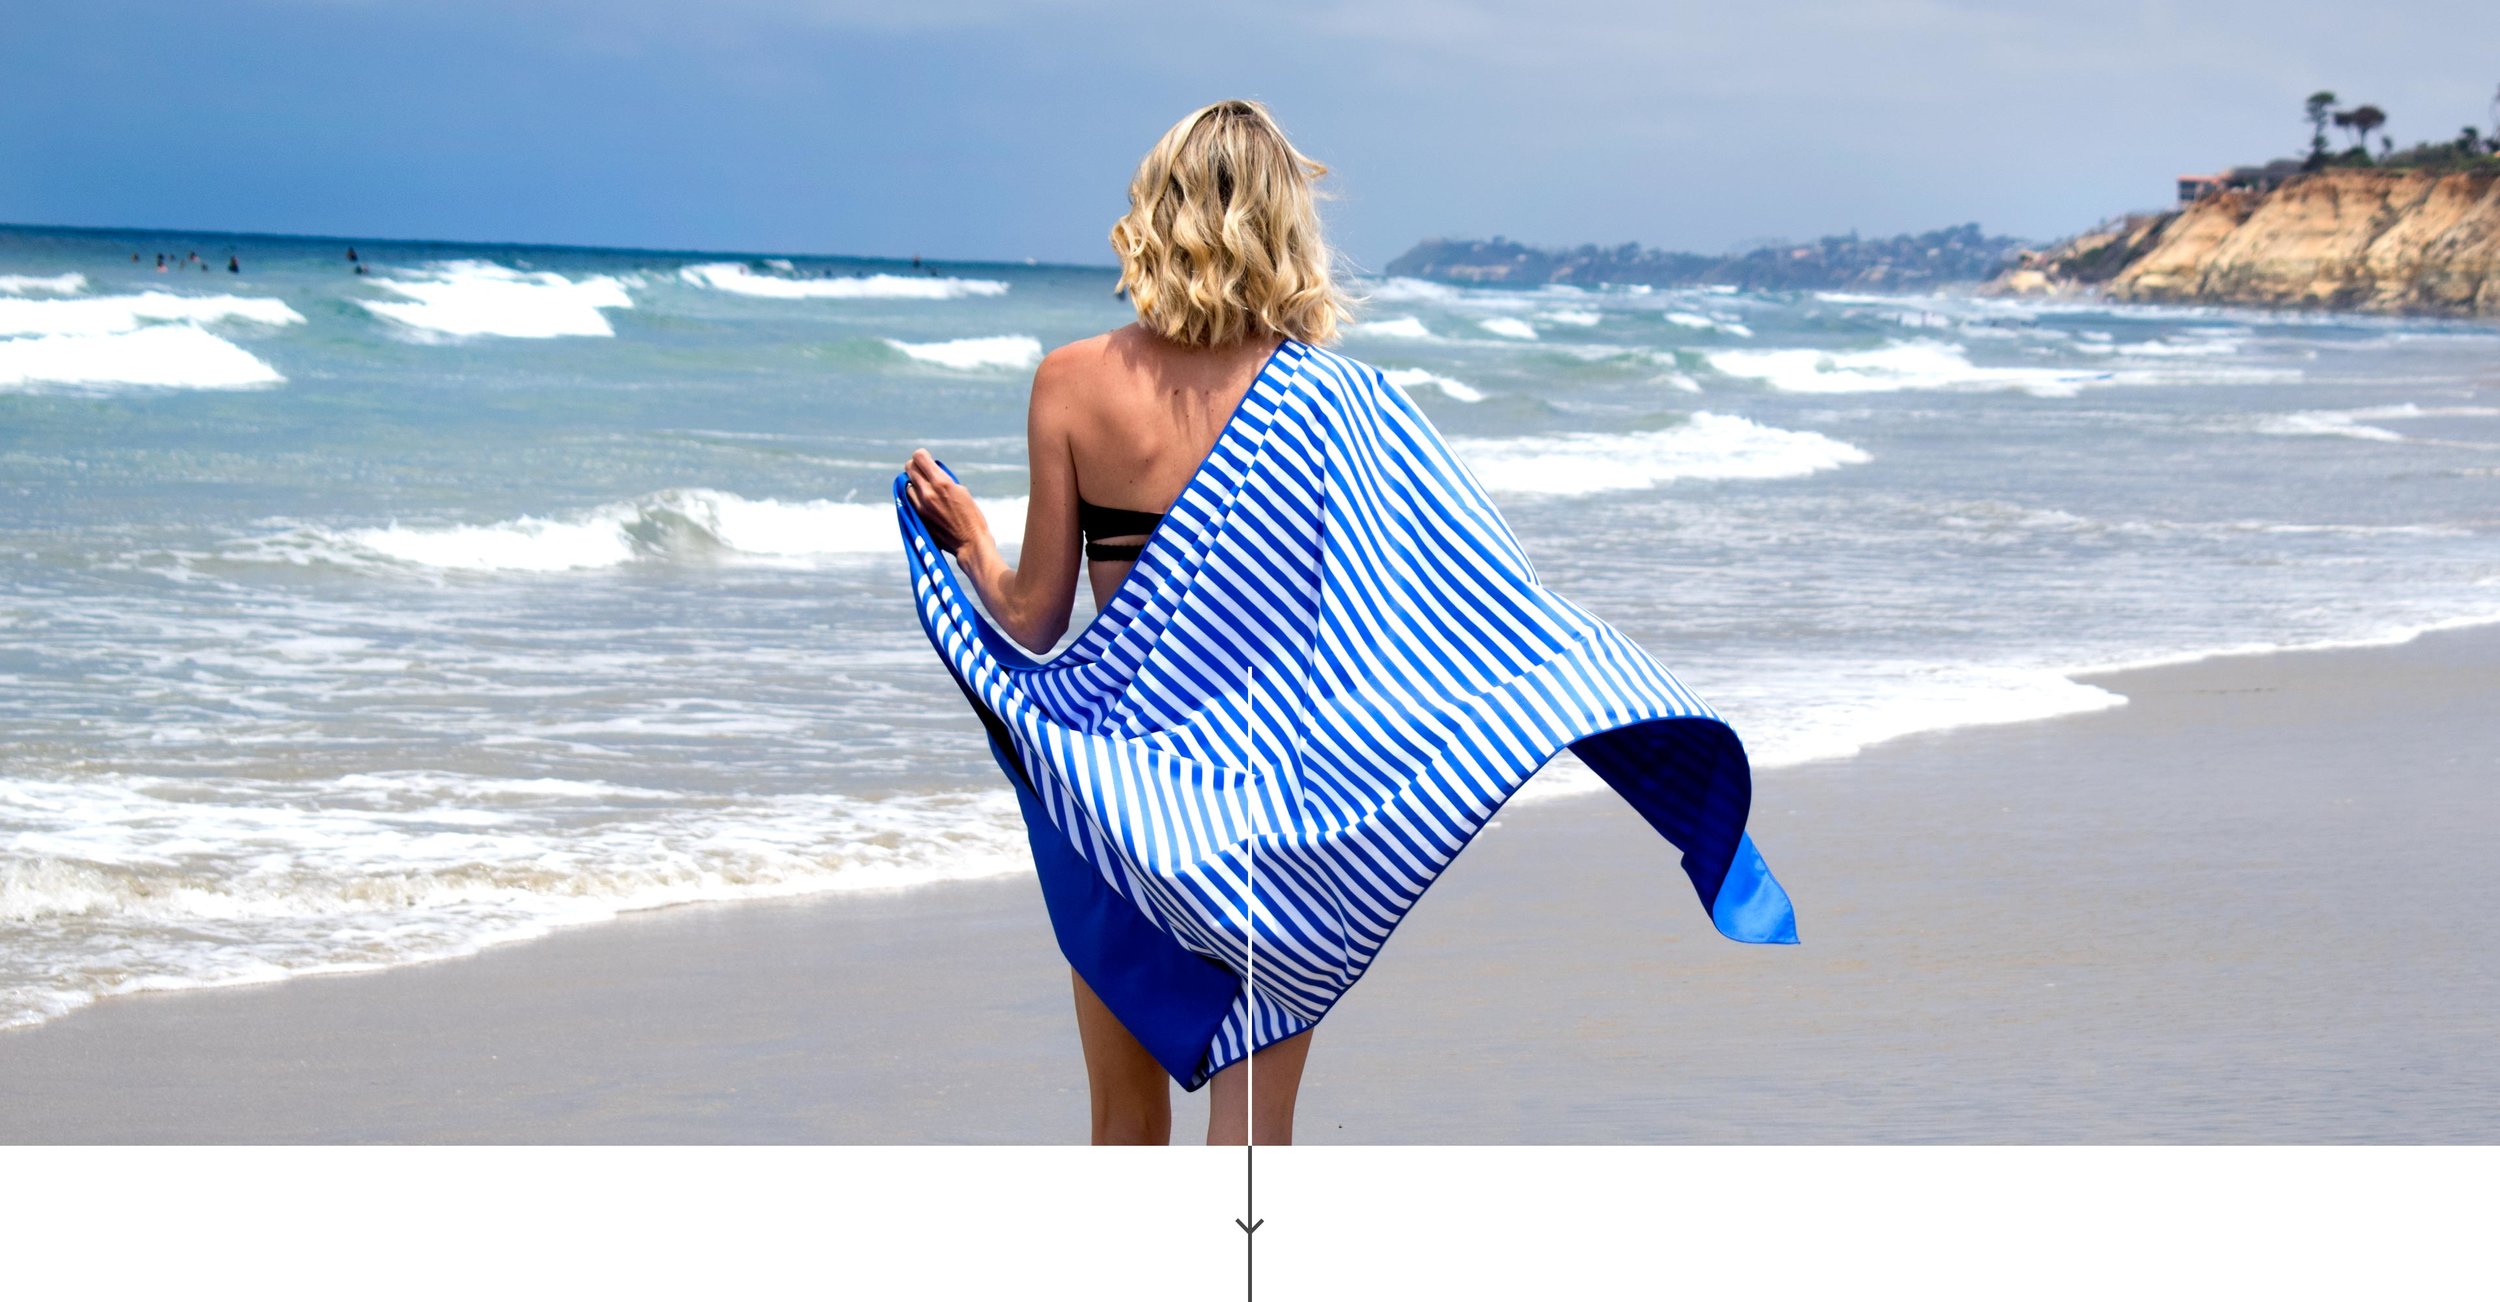 Perfect for Travel Towel and Beach Blanket Quick Dry Oversized XL 70 x 35 Inch Compact Extra Large Lightweight with Zipper Bag Sand Free Lytepark Microfiber Beach Towel for Travel 